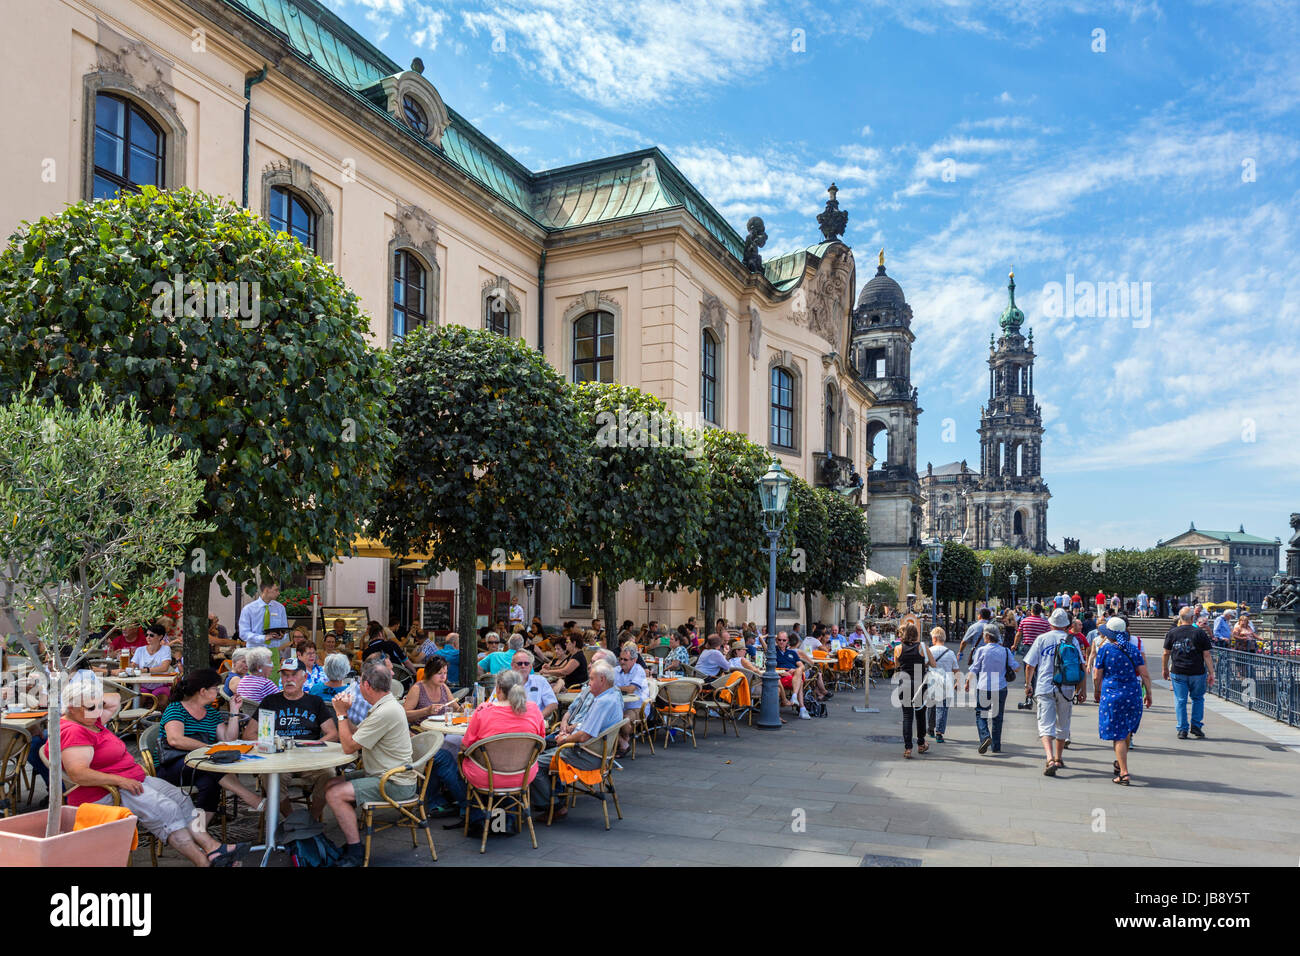 Cafe on the Brühlsche Terrasse overlooking the River Elbe, Dresden, Saxony, Germany Stock Photo